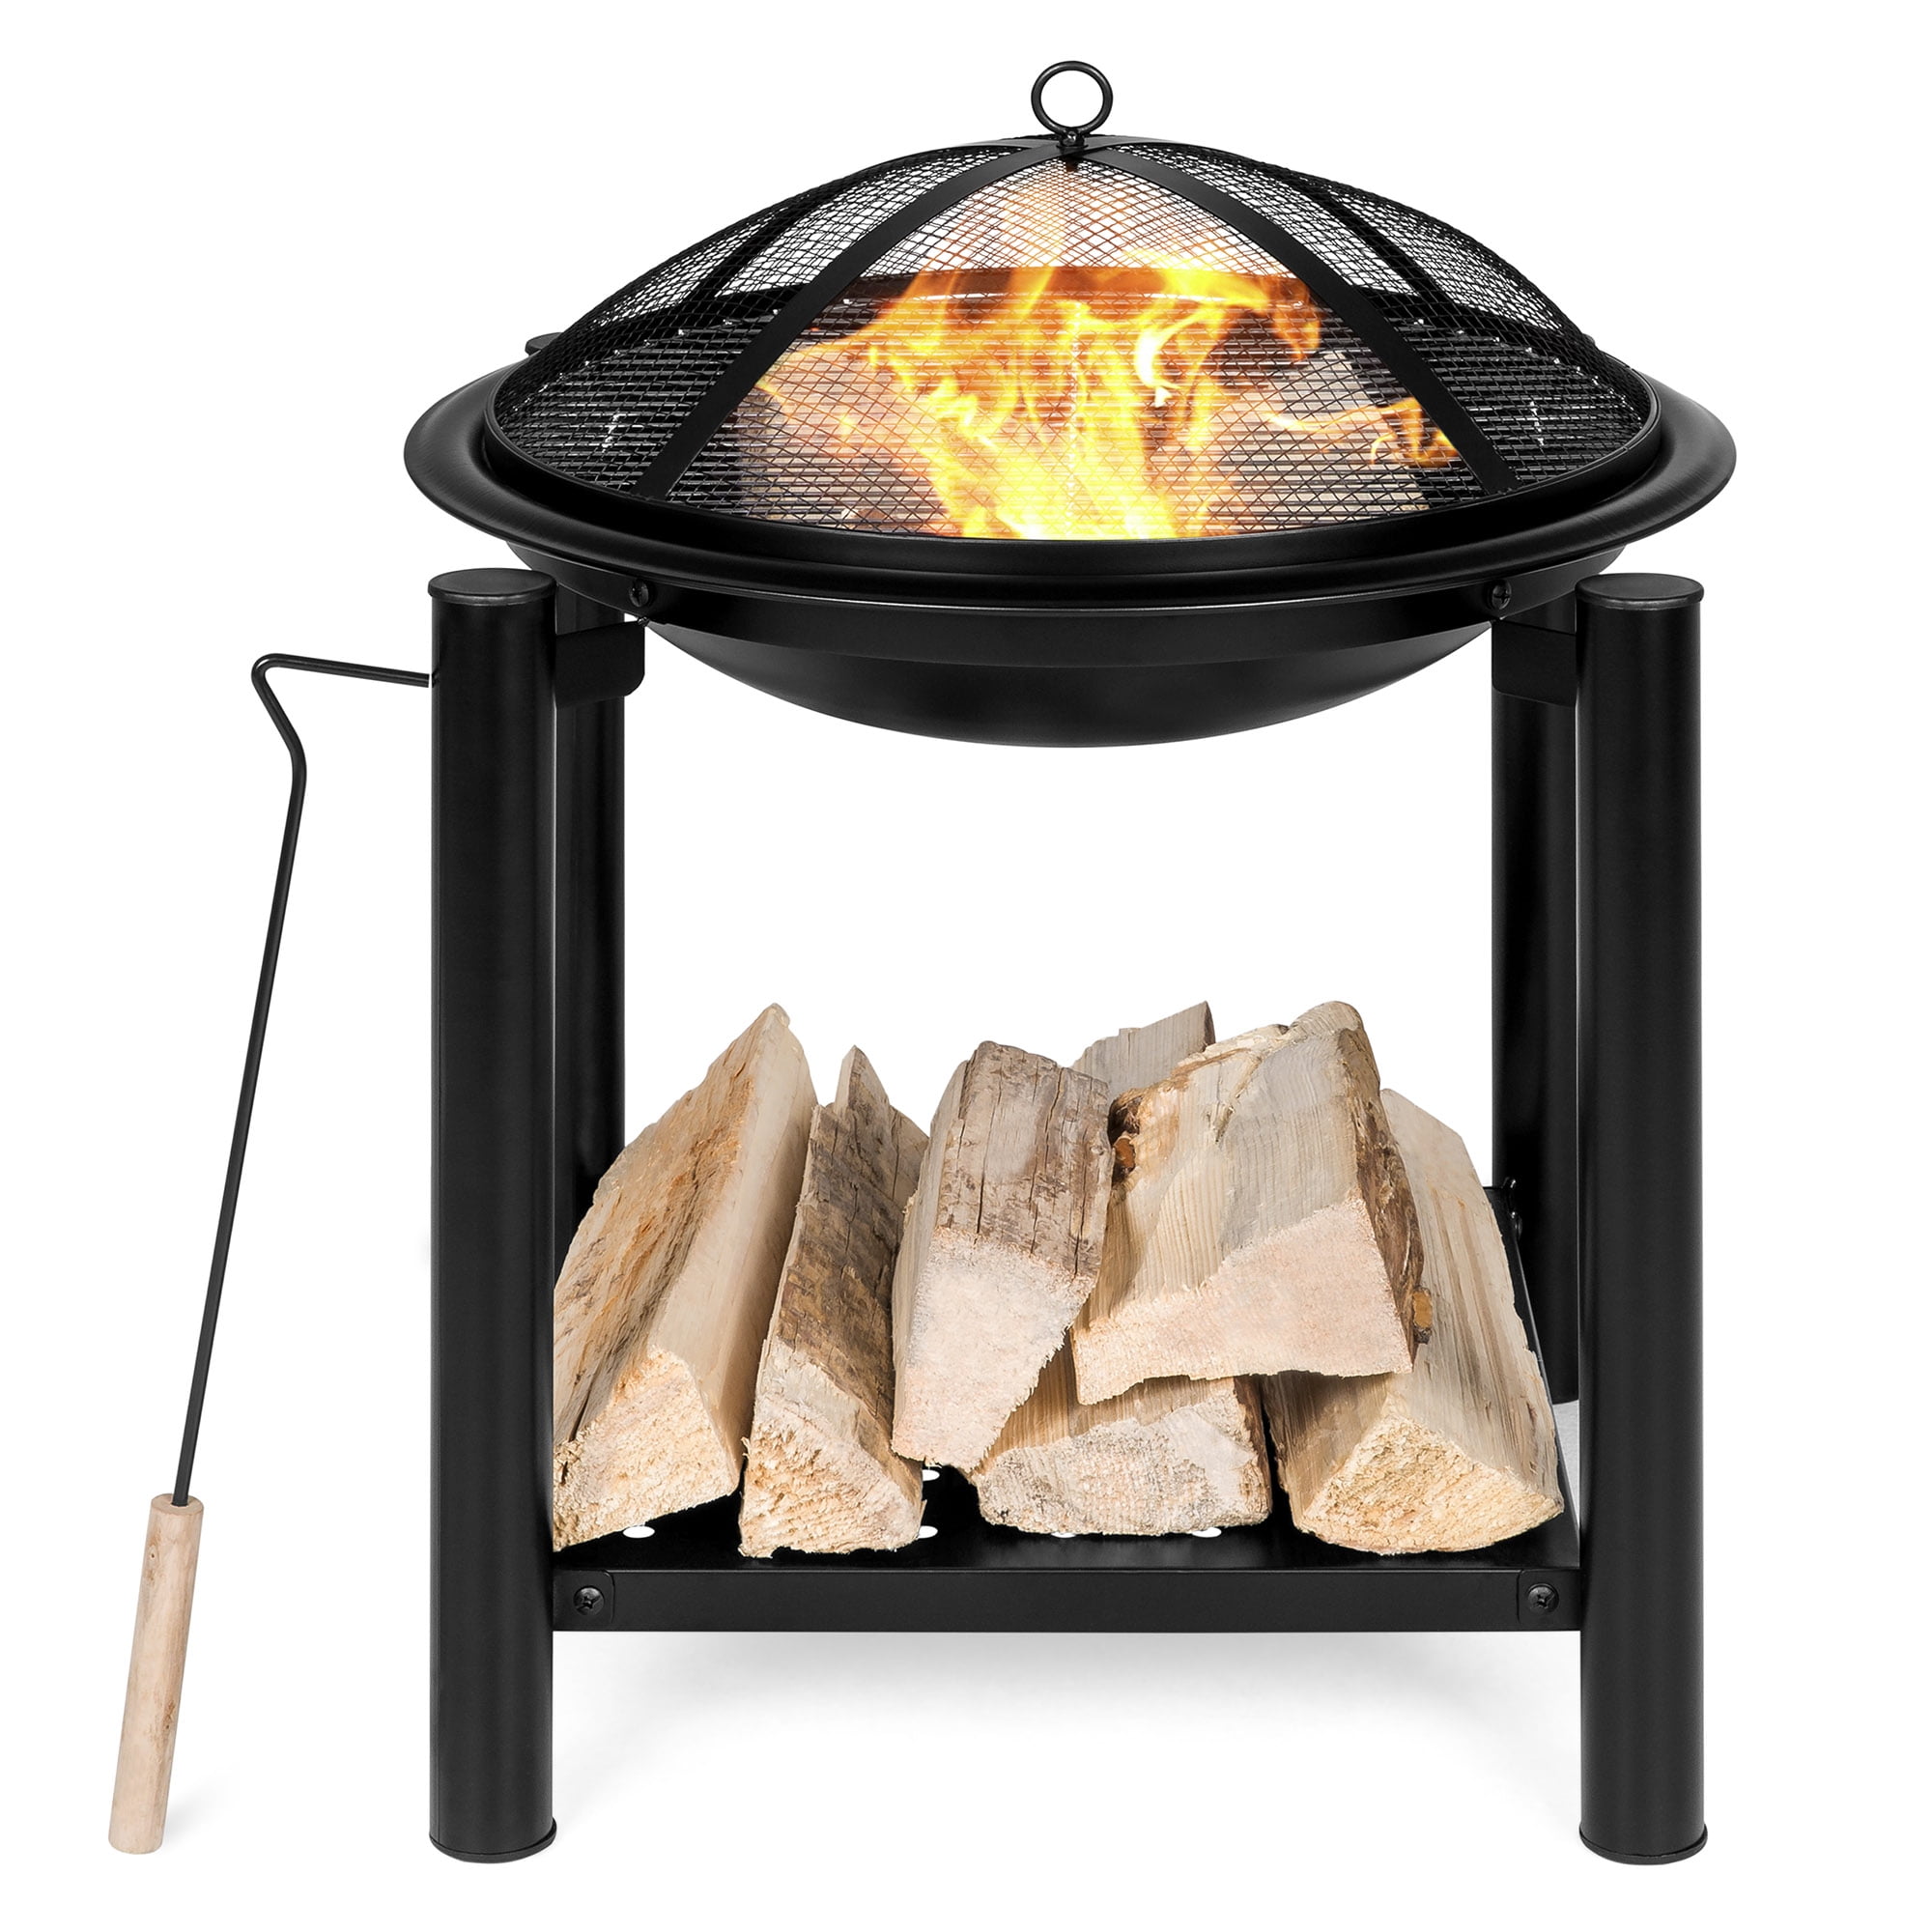 21 5 Inch Patio Fire Pit Bowl, Best Kindling For Fire Pit